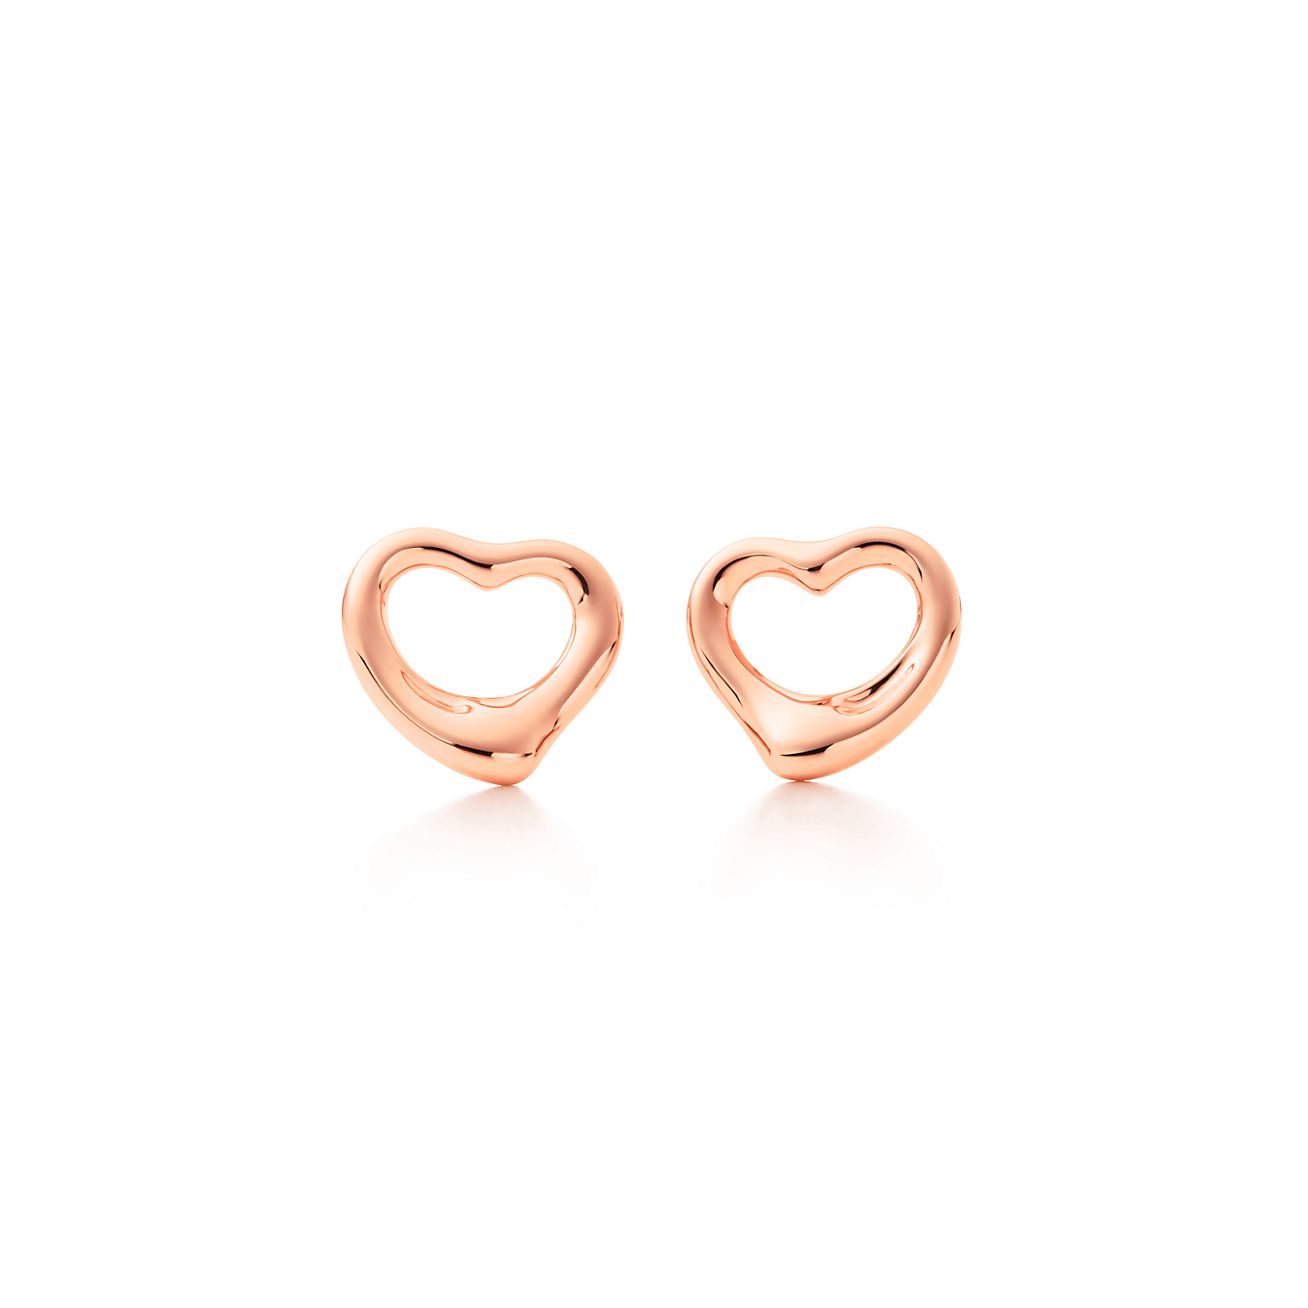 tiffany and co earrings rose gold